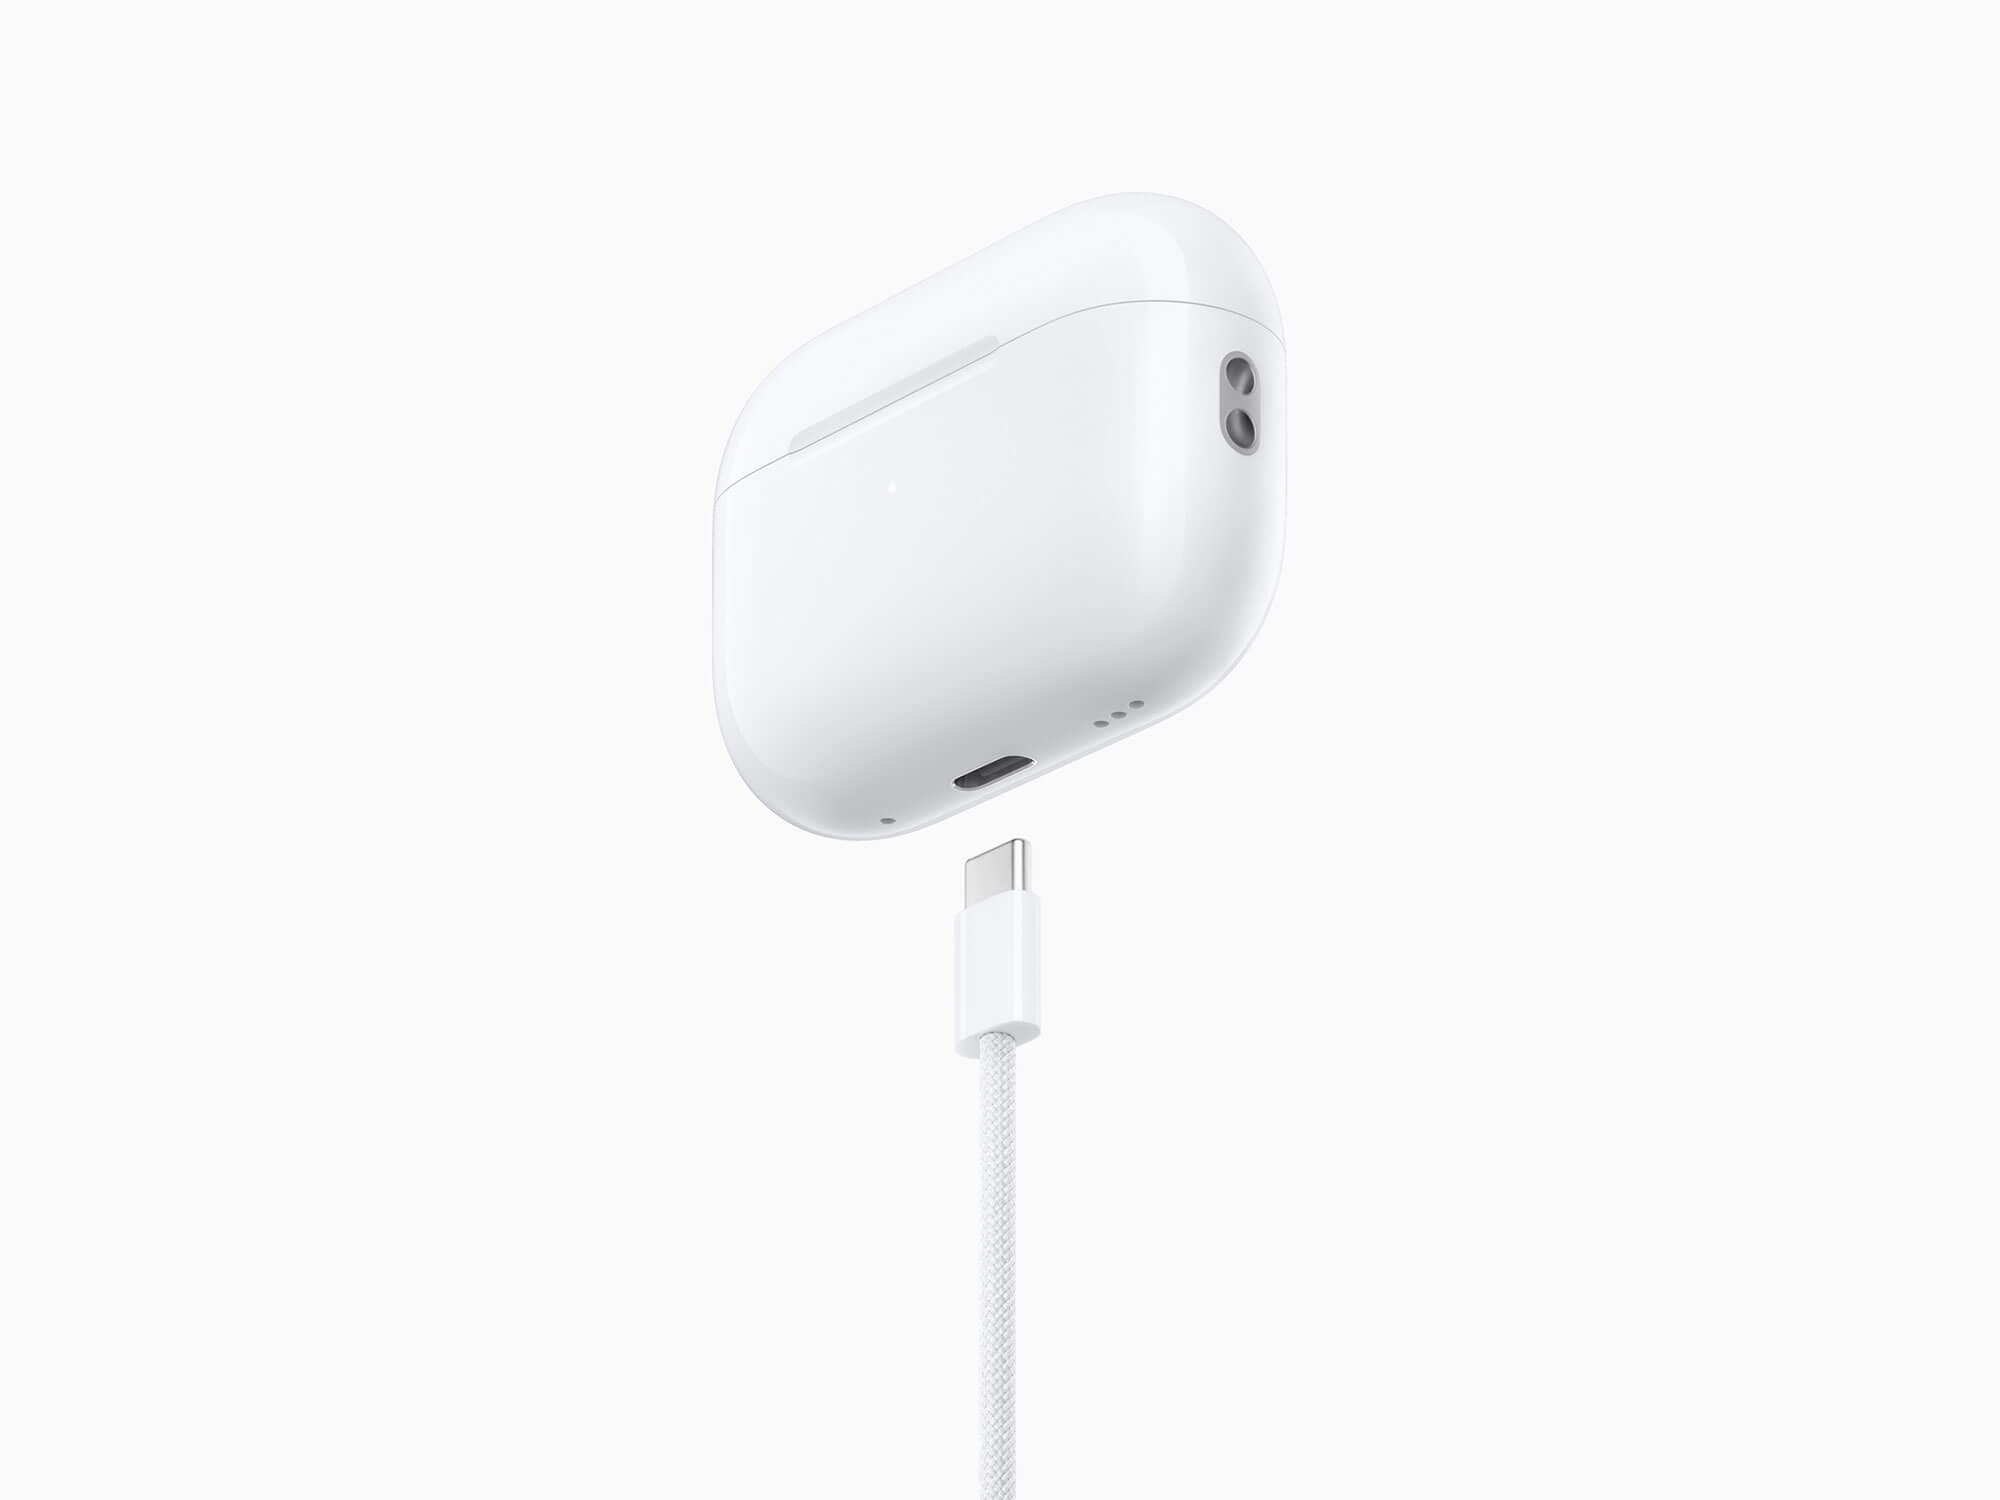 Apple AirPods 2nd Generation charging case